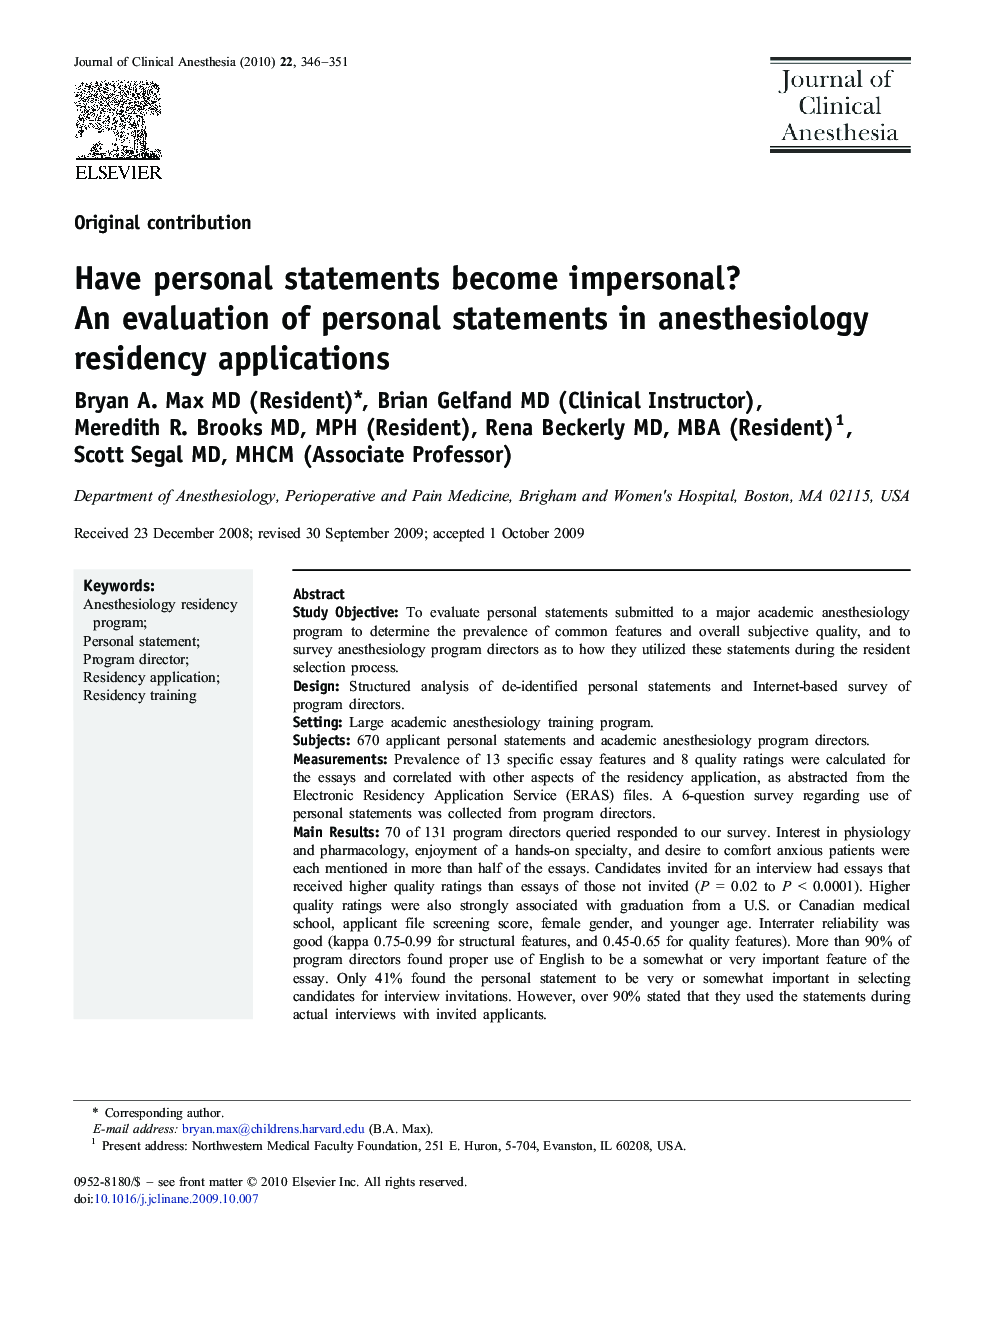 Have personal statements become impersonal? An evaluation of personal statements in anesthesiology residency applications